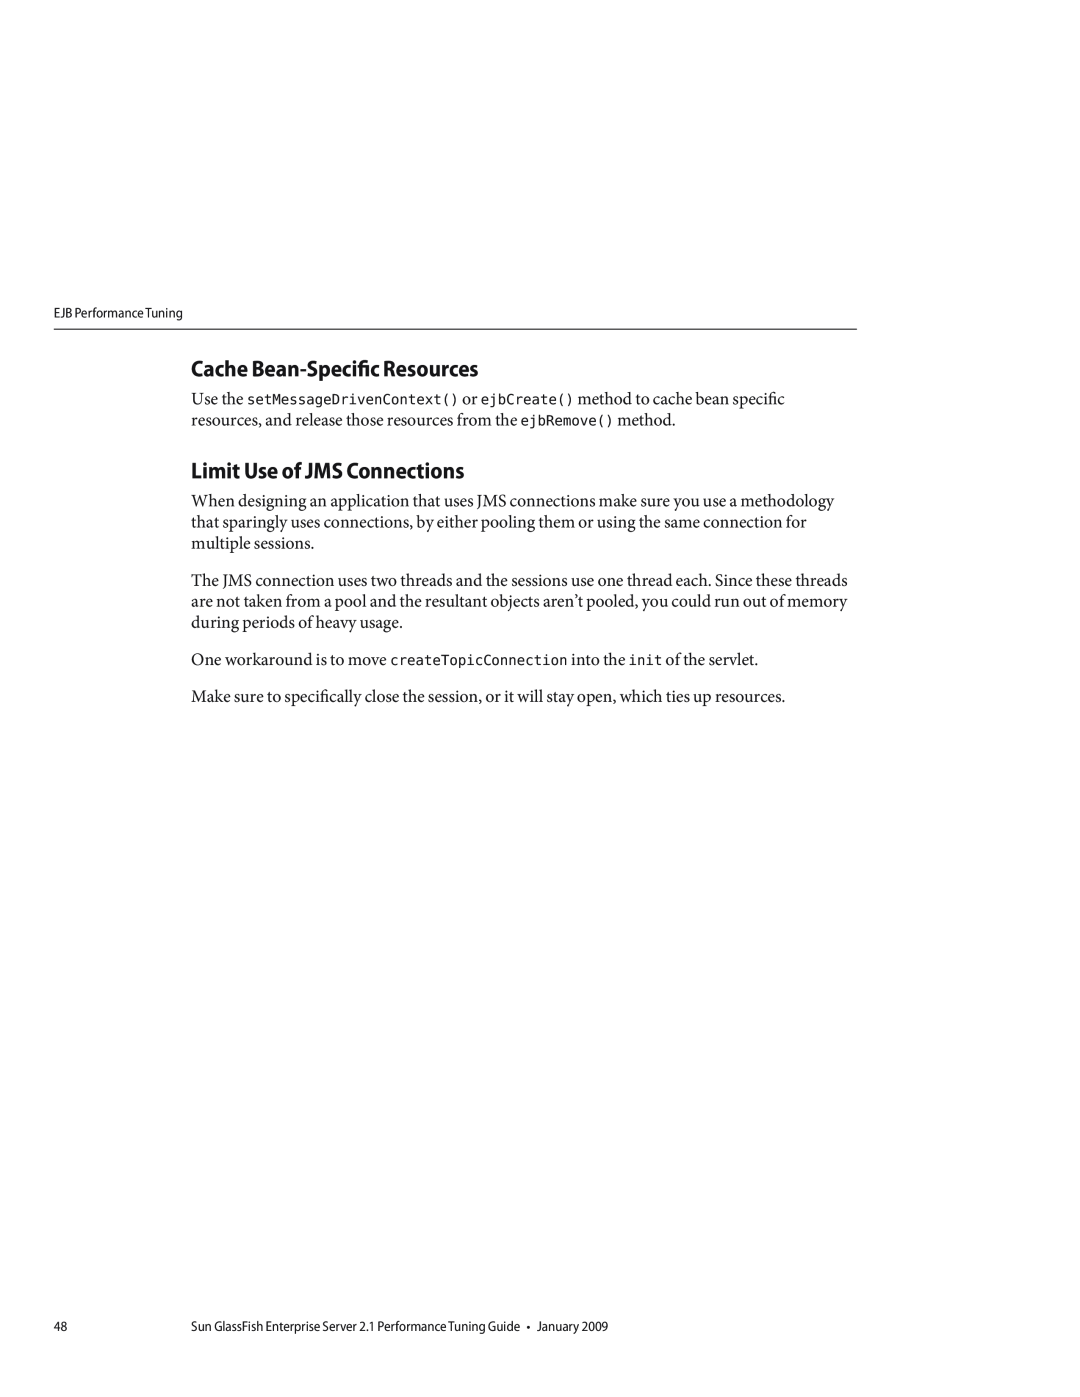 Sun Microsystems 820434310 manual Cache Bean-Specific Resources, Limit Use of JMS Connections 